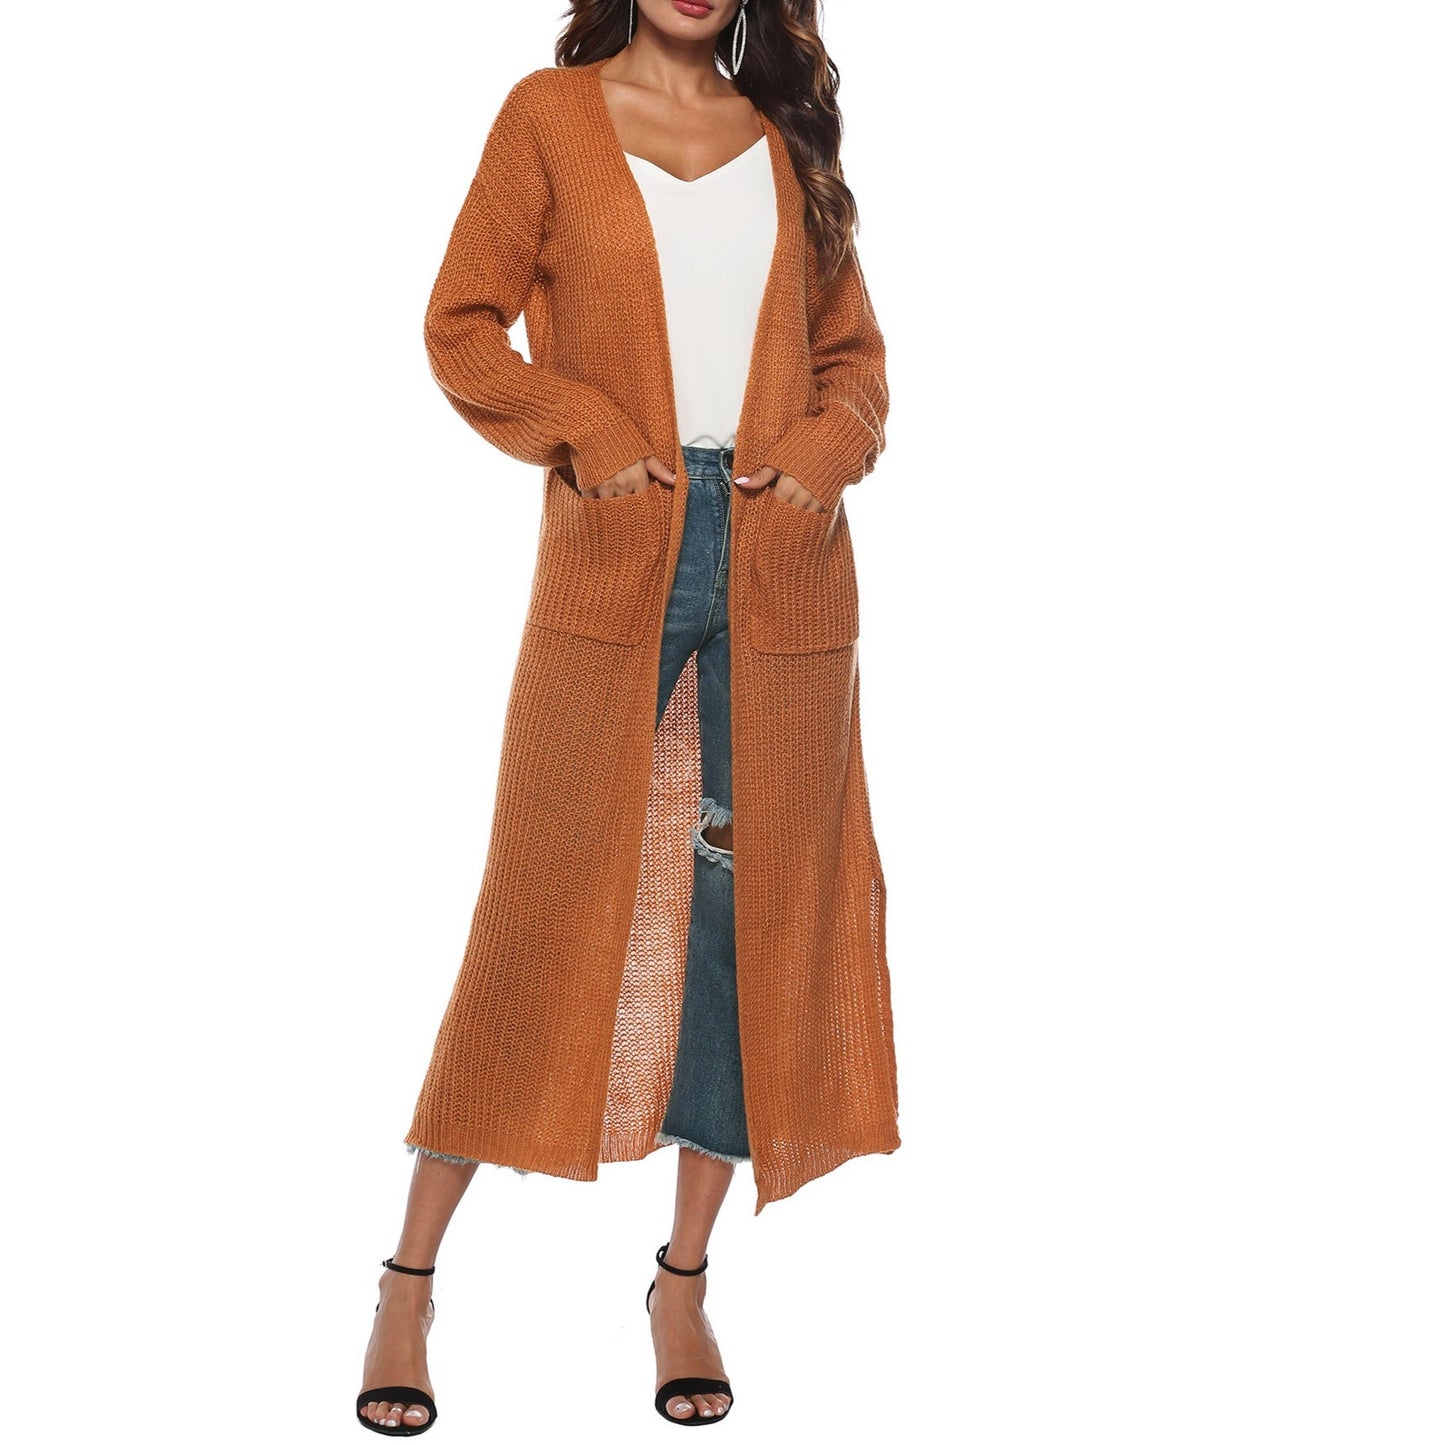 Women's Cardigan Sweater With Large Pockets Cardigan Sweater Long Thin Coat